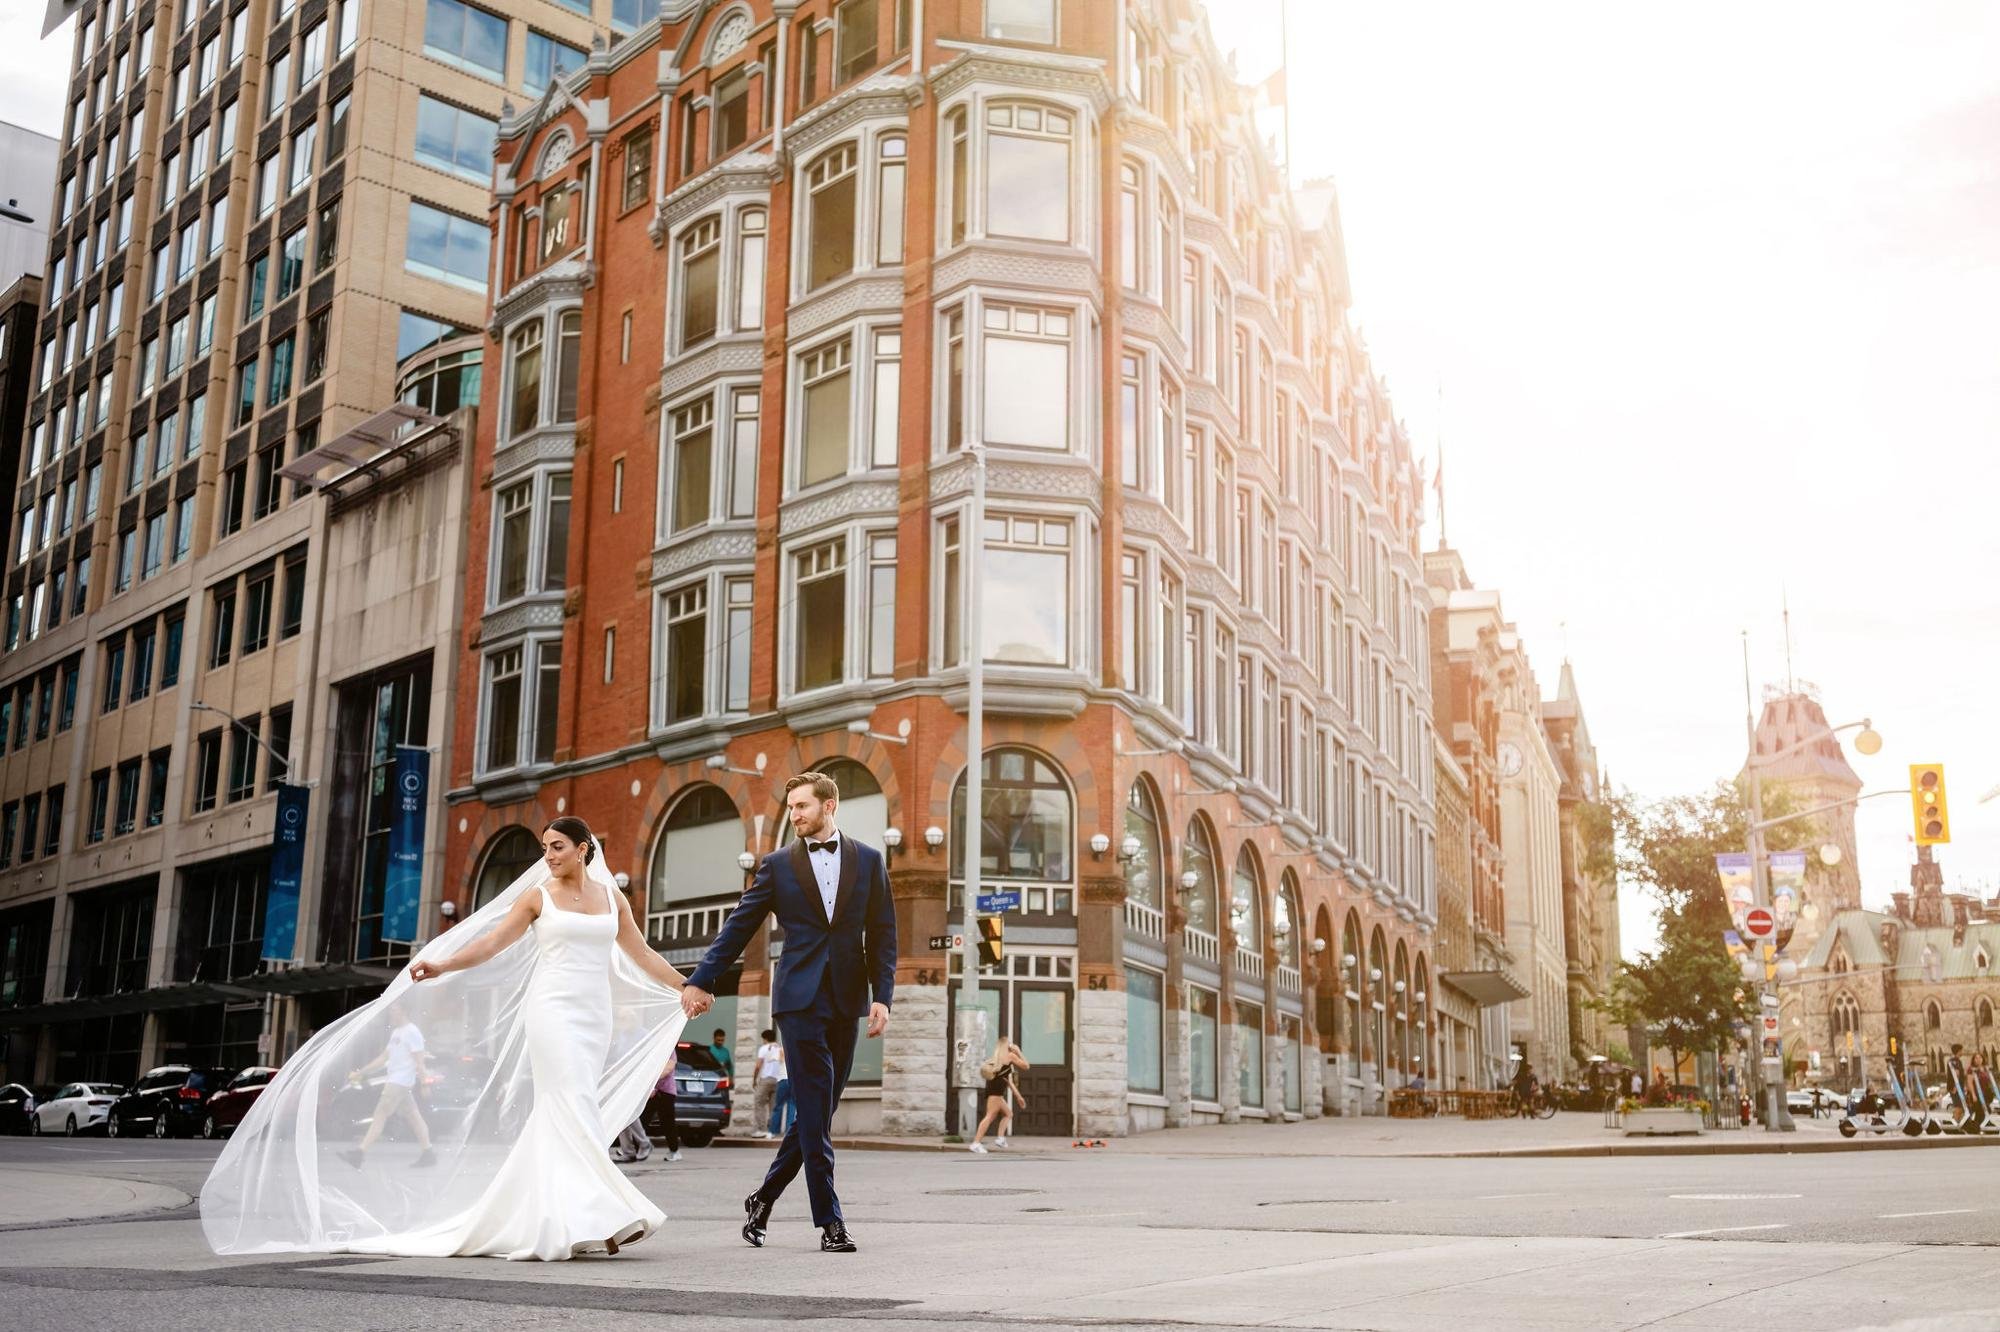 a sunset wedding photo in downtown ottawa outside the national arts centre